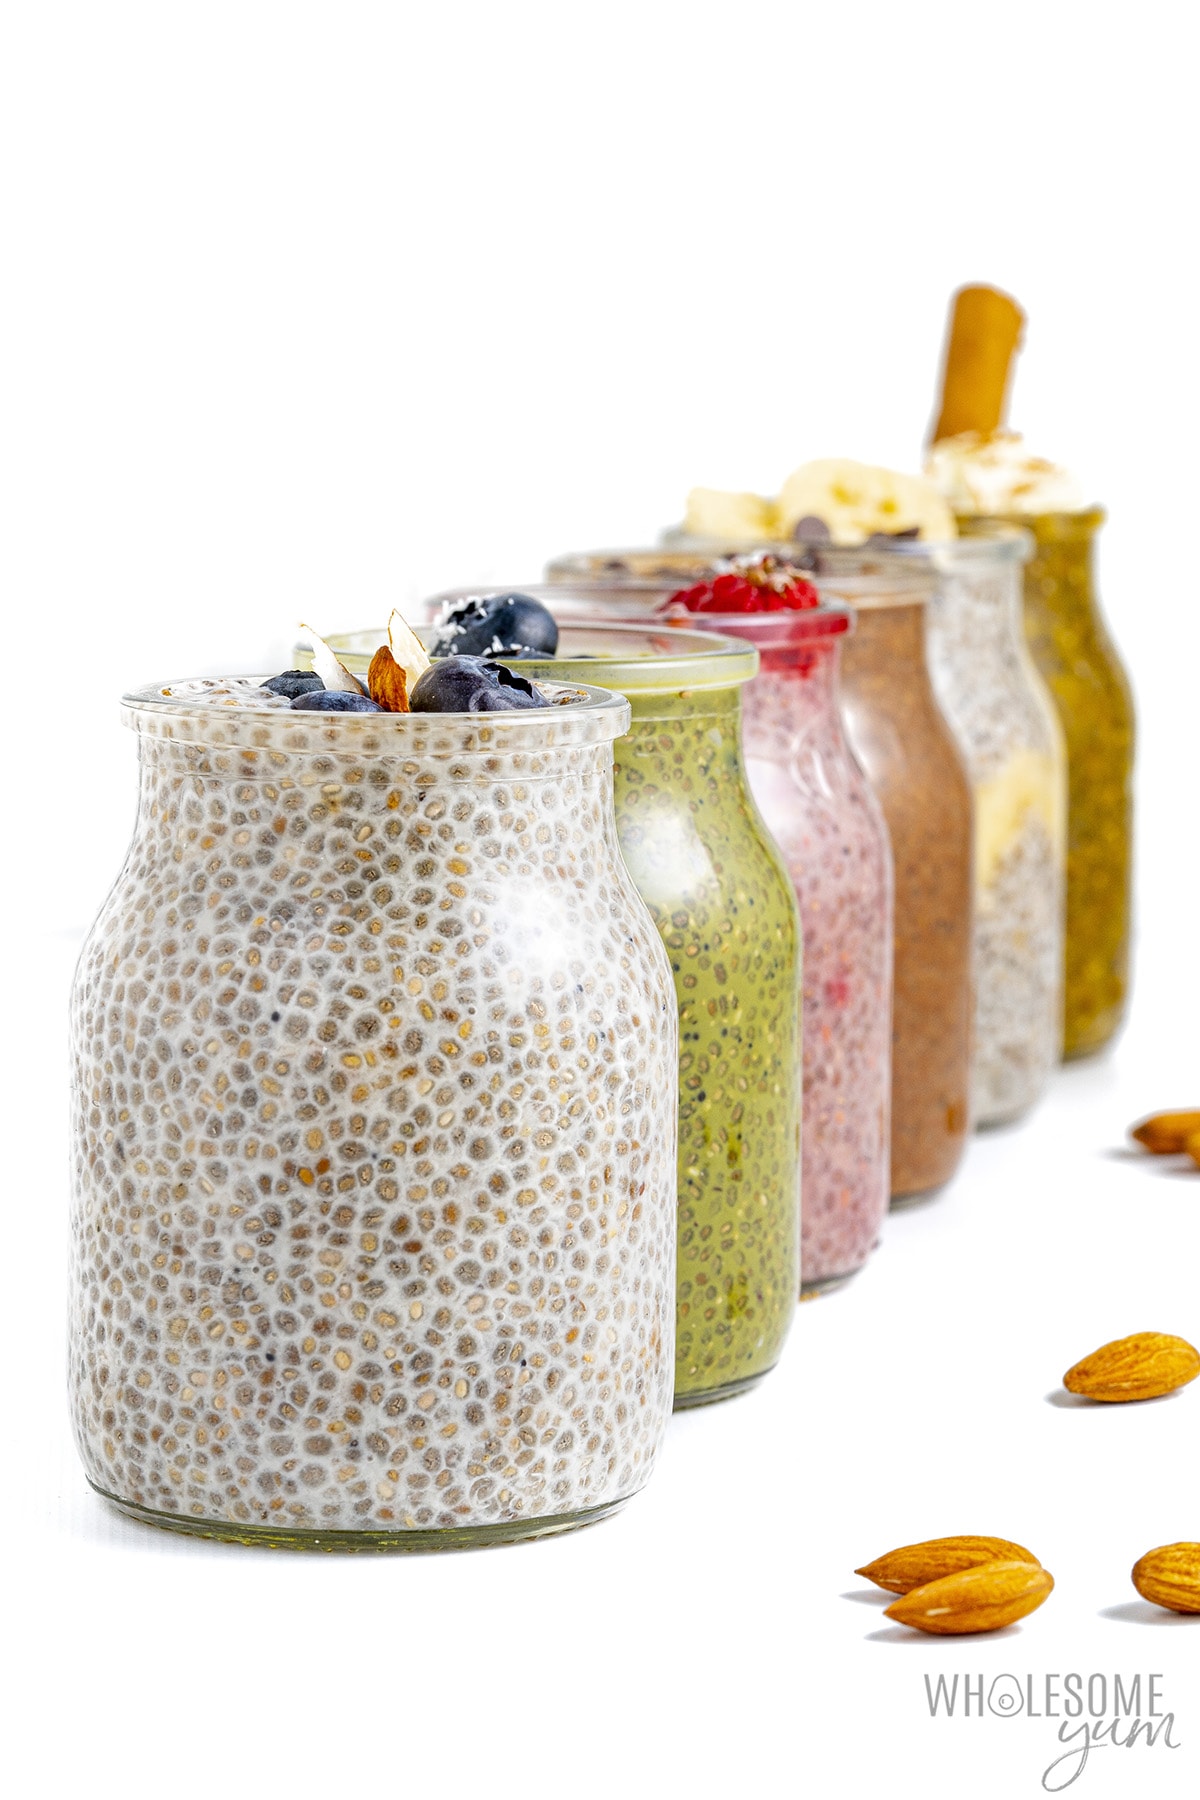 Chia pudding recipes lined up in jars.